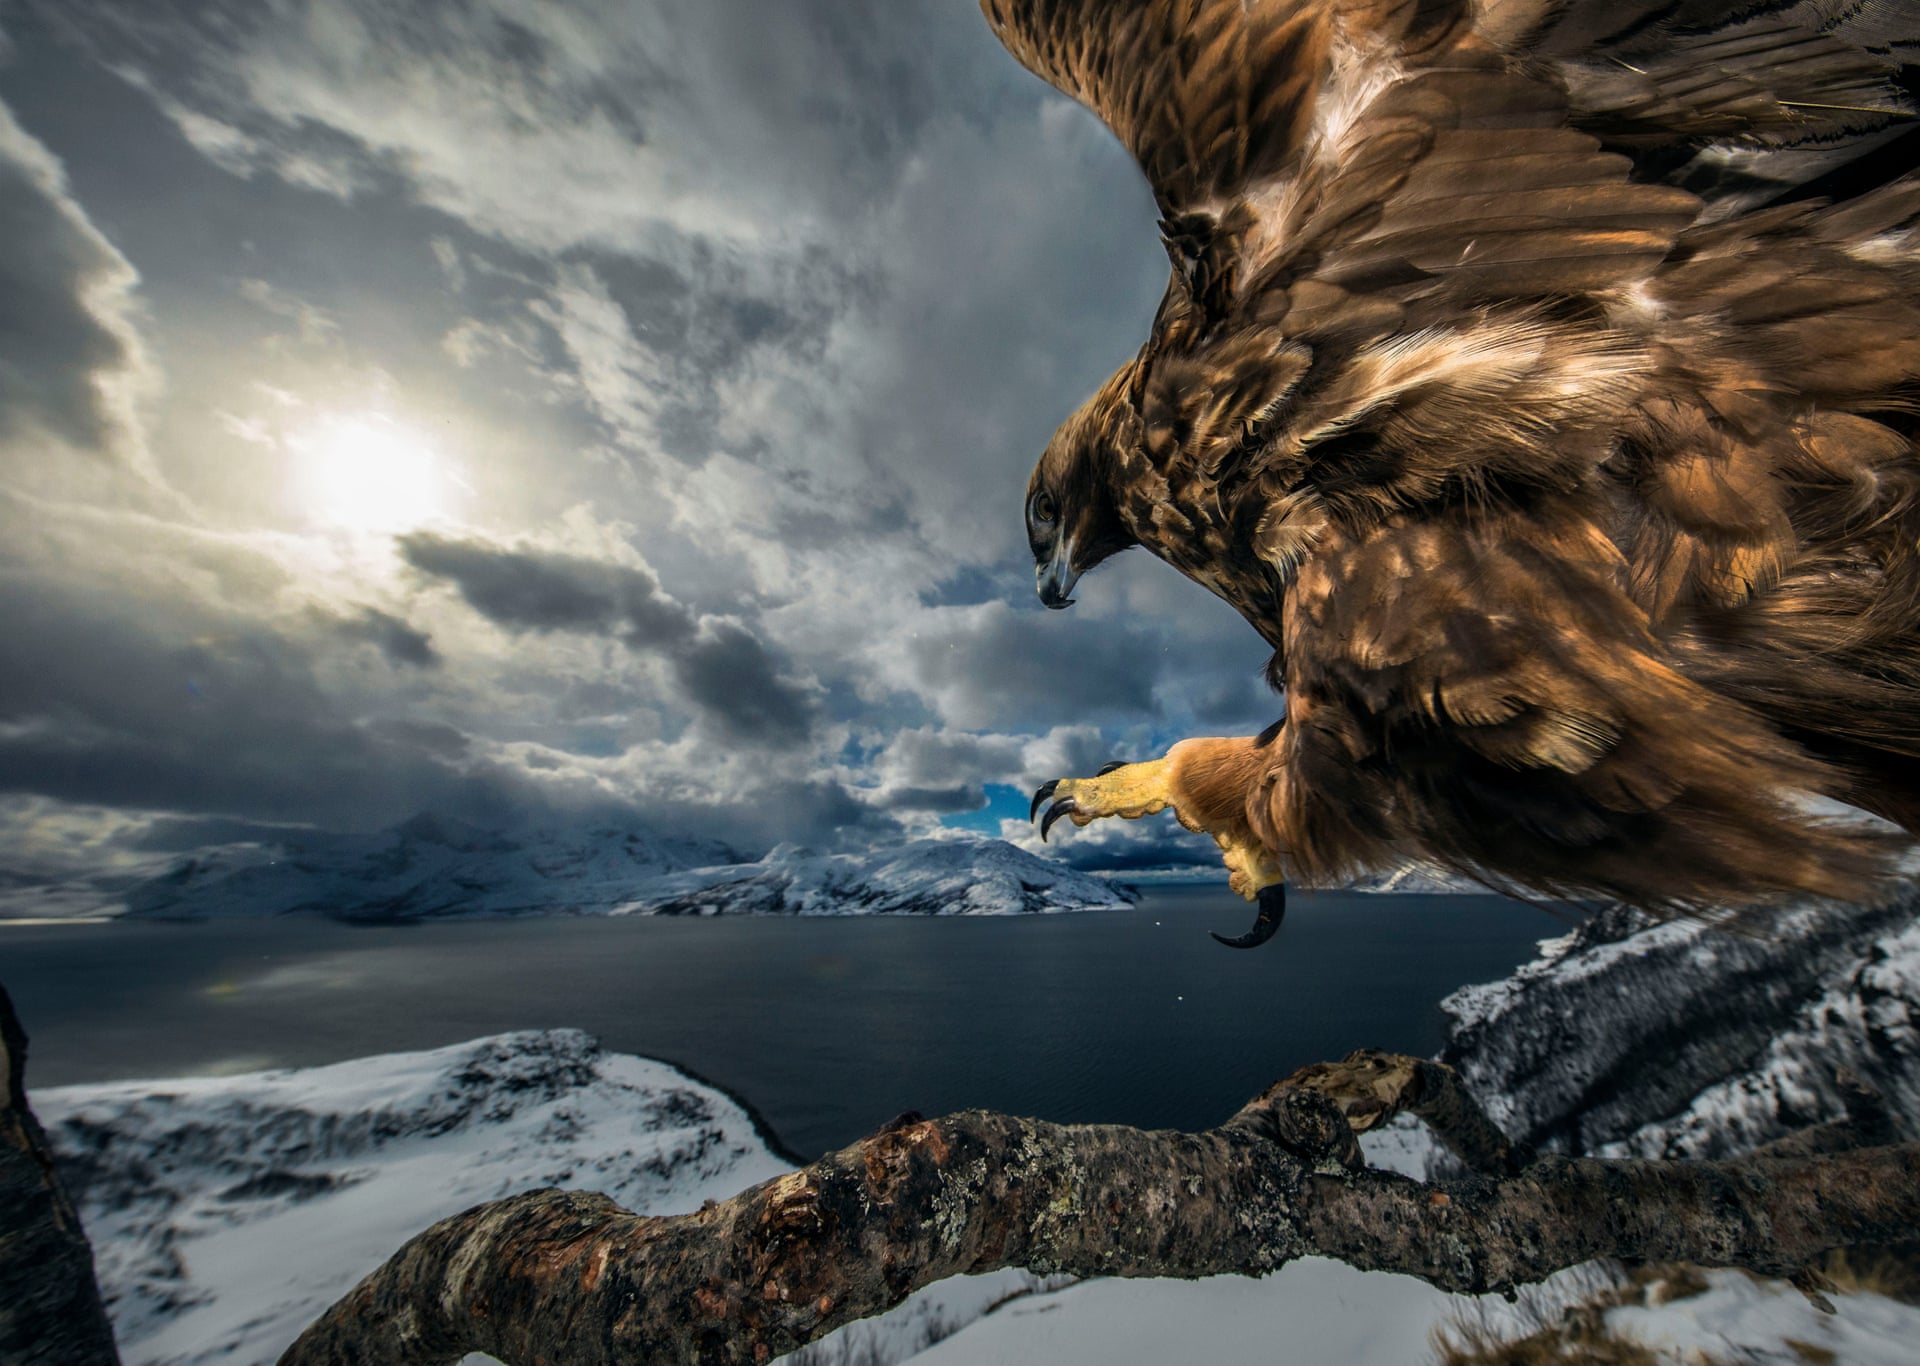 Conjour - Wildlife Photographer of the Year 2019 - Natural History Museum - Wildlife Photography - Animals have stories